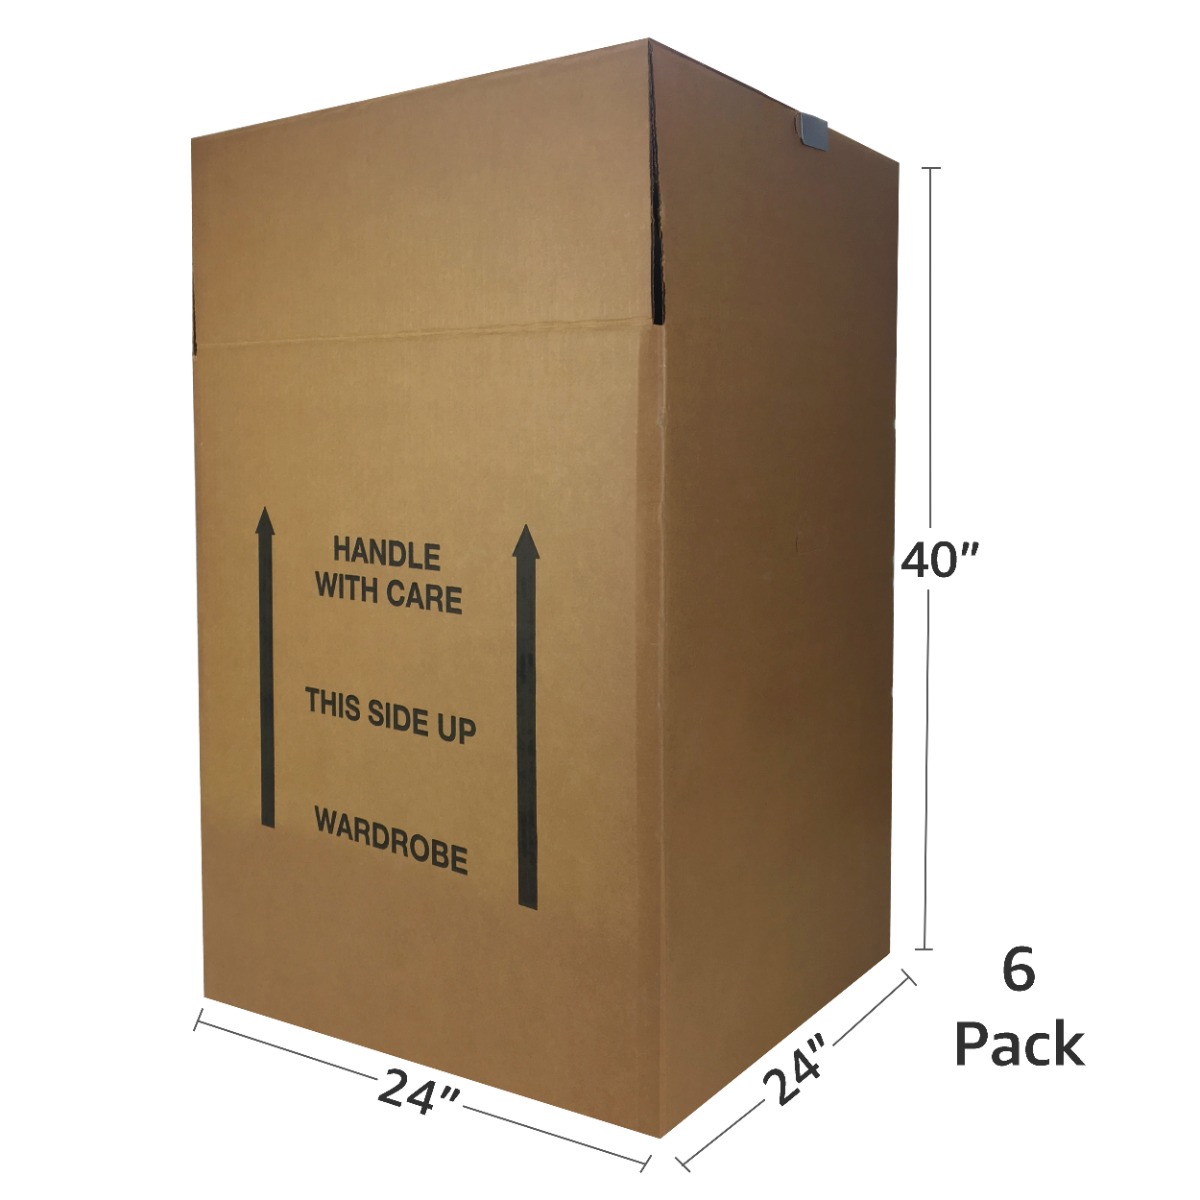 UBMOVE Wardrobe Boxes - Qty: 6 Boxes w Bars - Moving Boxes Fast 